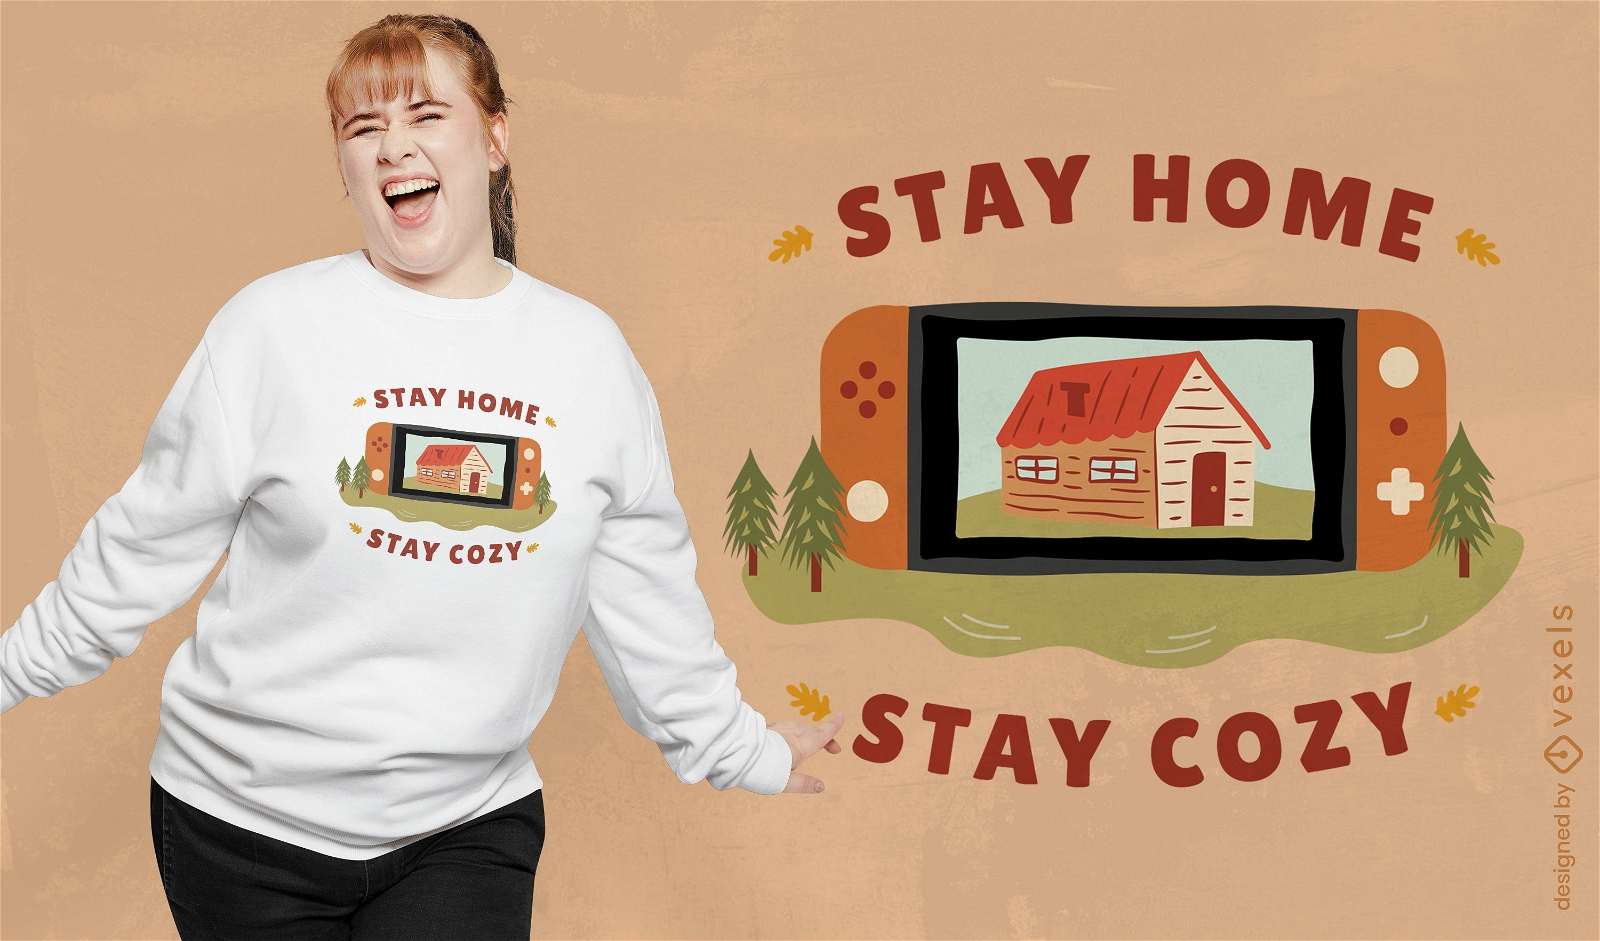 Stay home stay cozy gaming t-shirt design